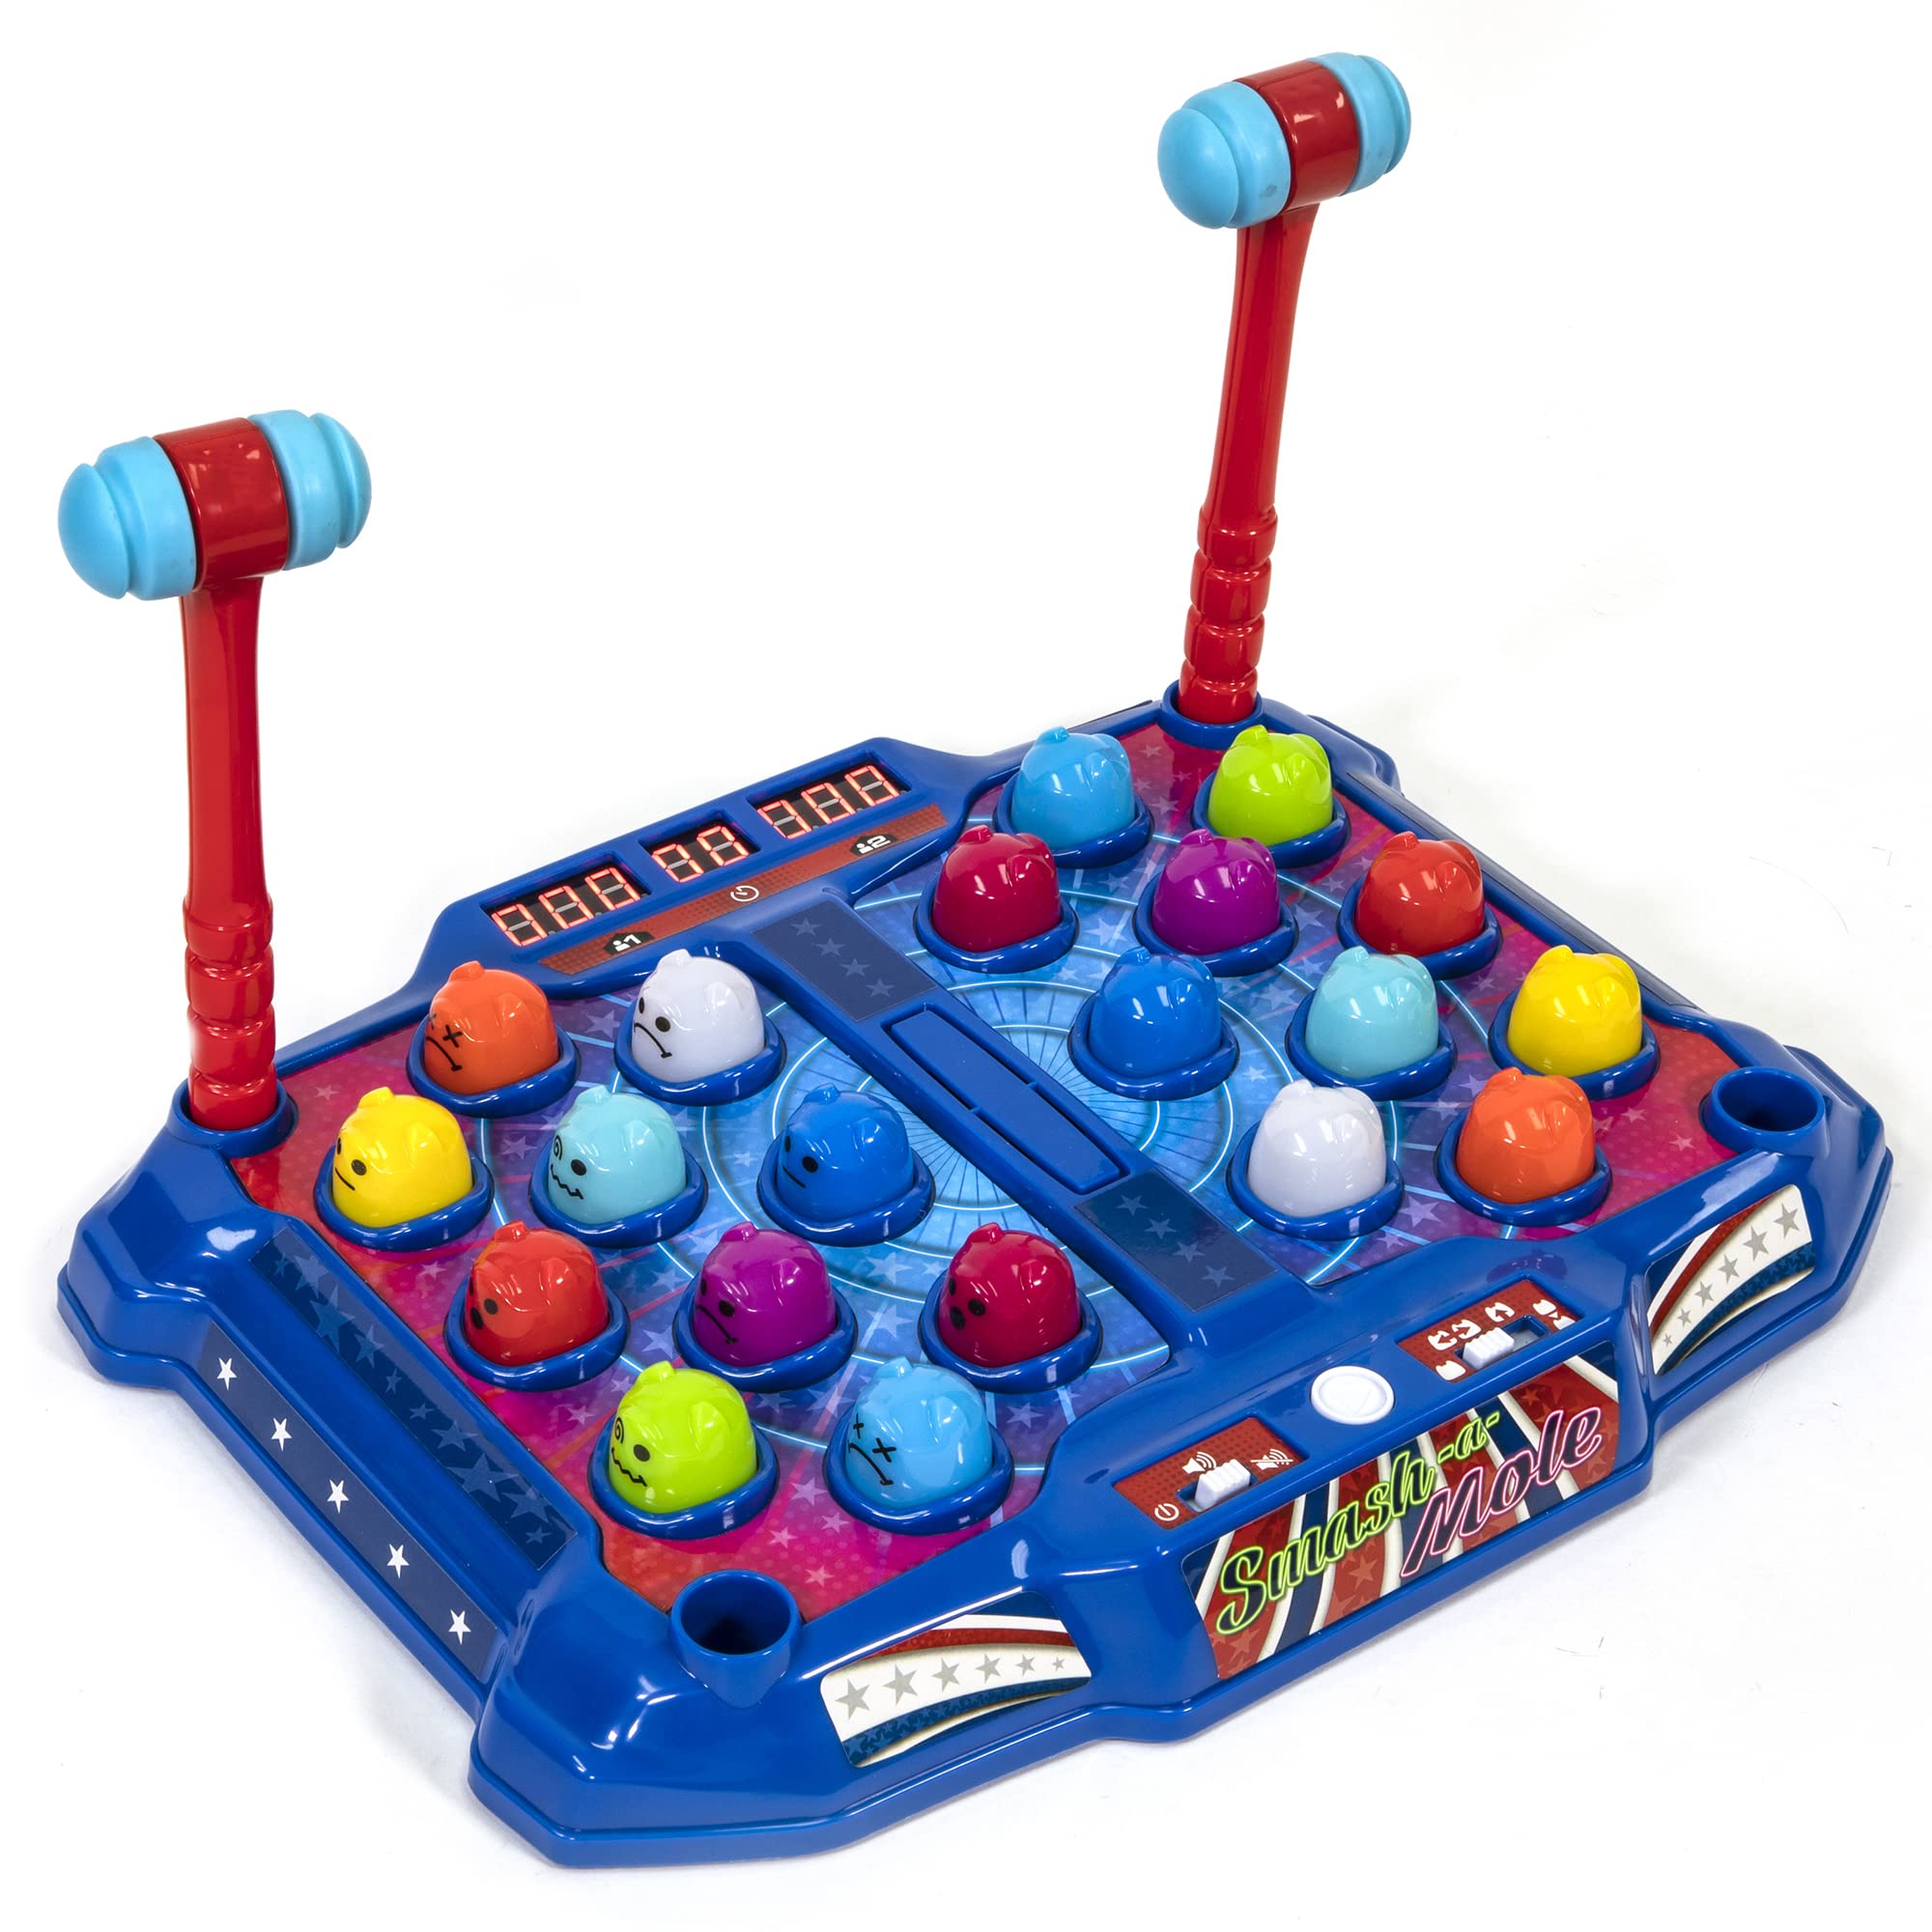 Retro Arcade: Electronic Smash-A-Mole - Tabletop Game, Moles Light Up, 4 Playing Modes, 1-2 Players, Ages 6+